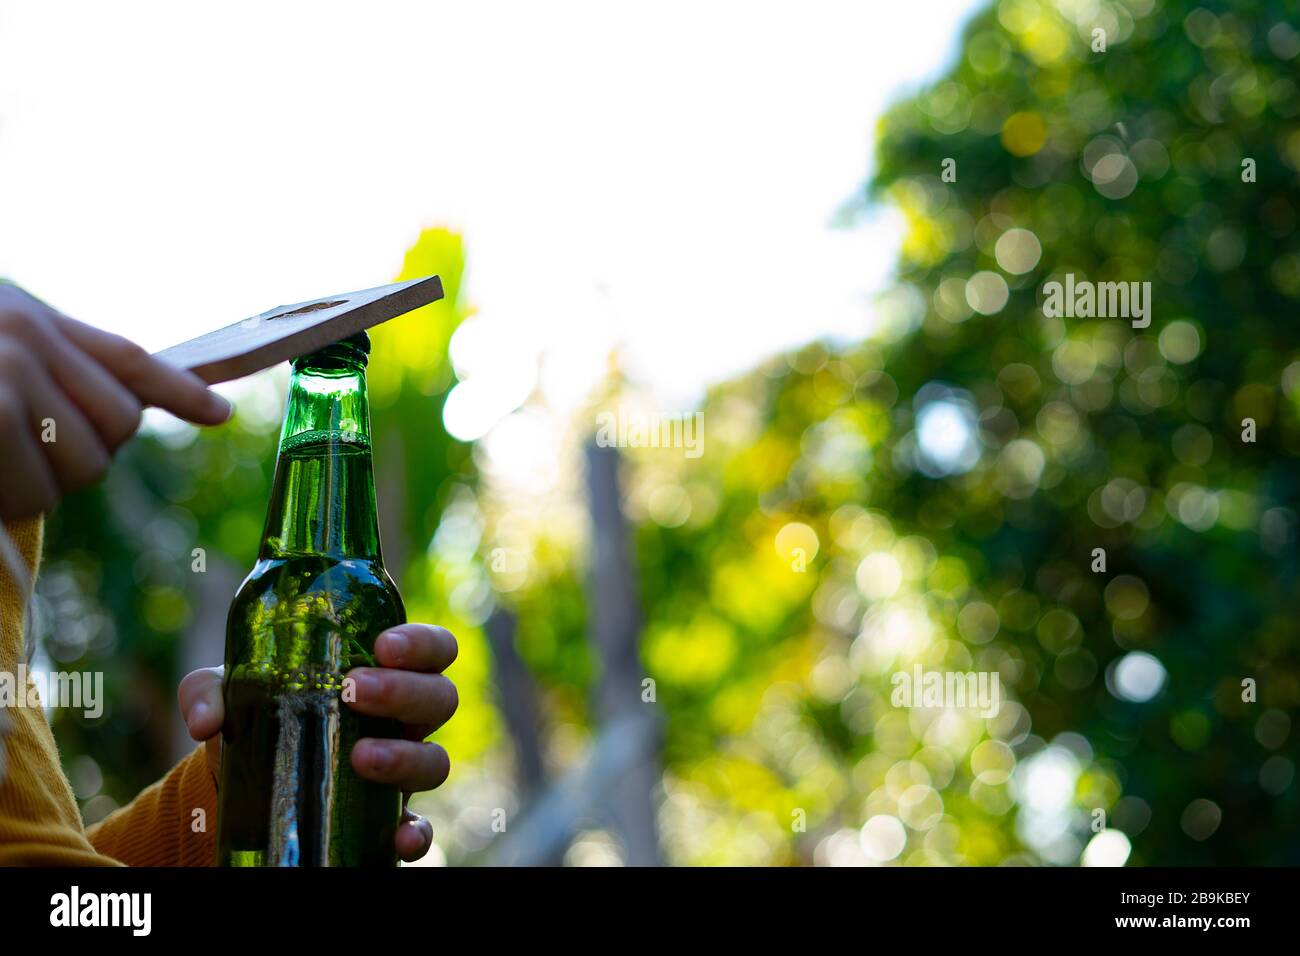 Opening a beer bottle with a bottle opener. Concept of opening a beer. Stock Photo